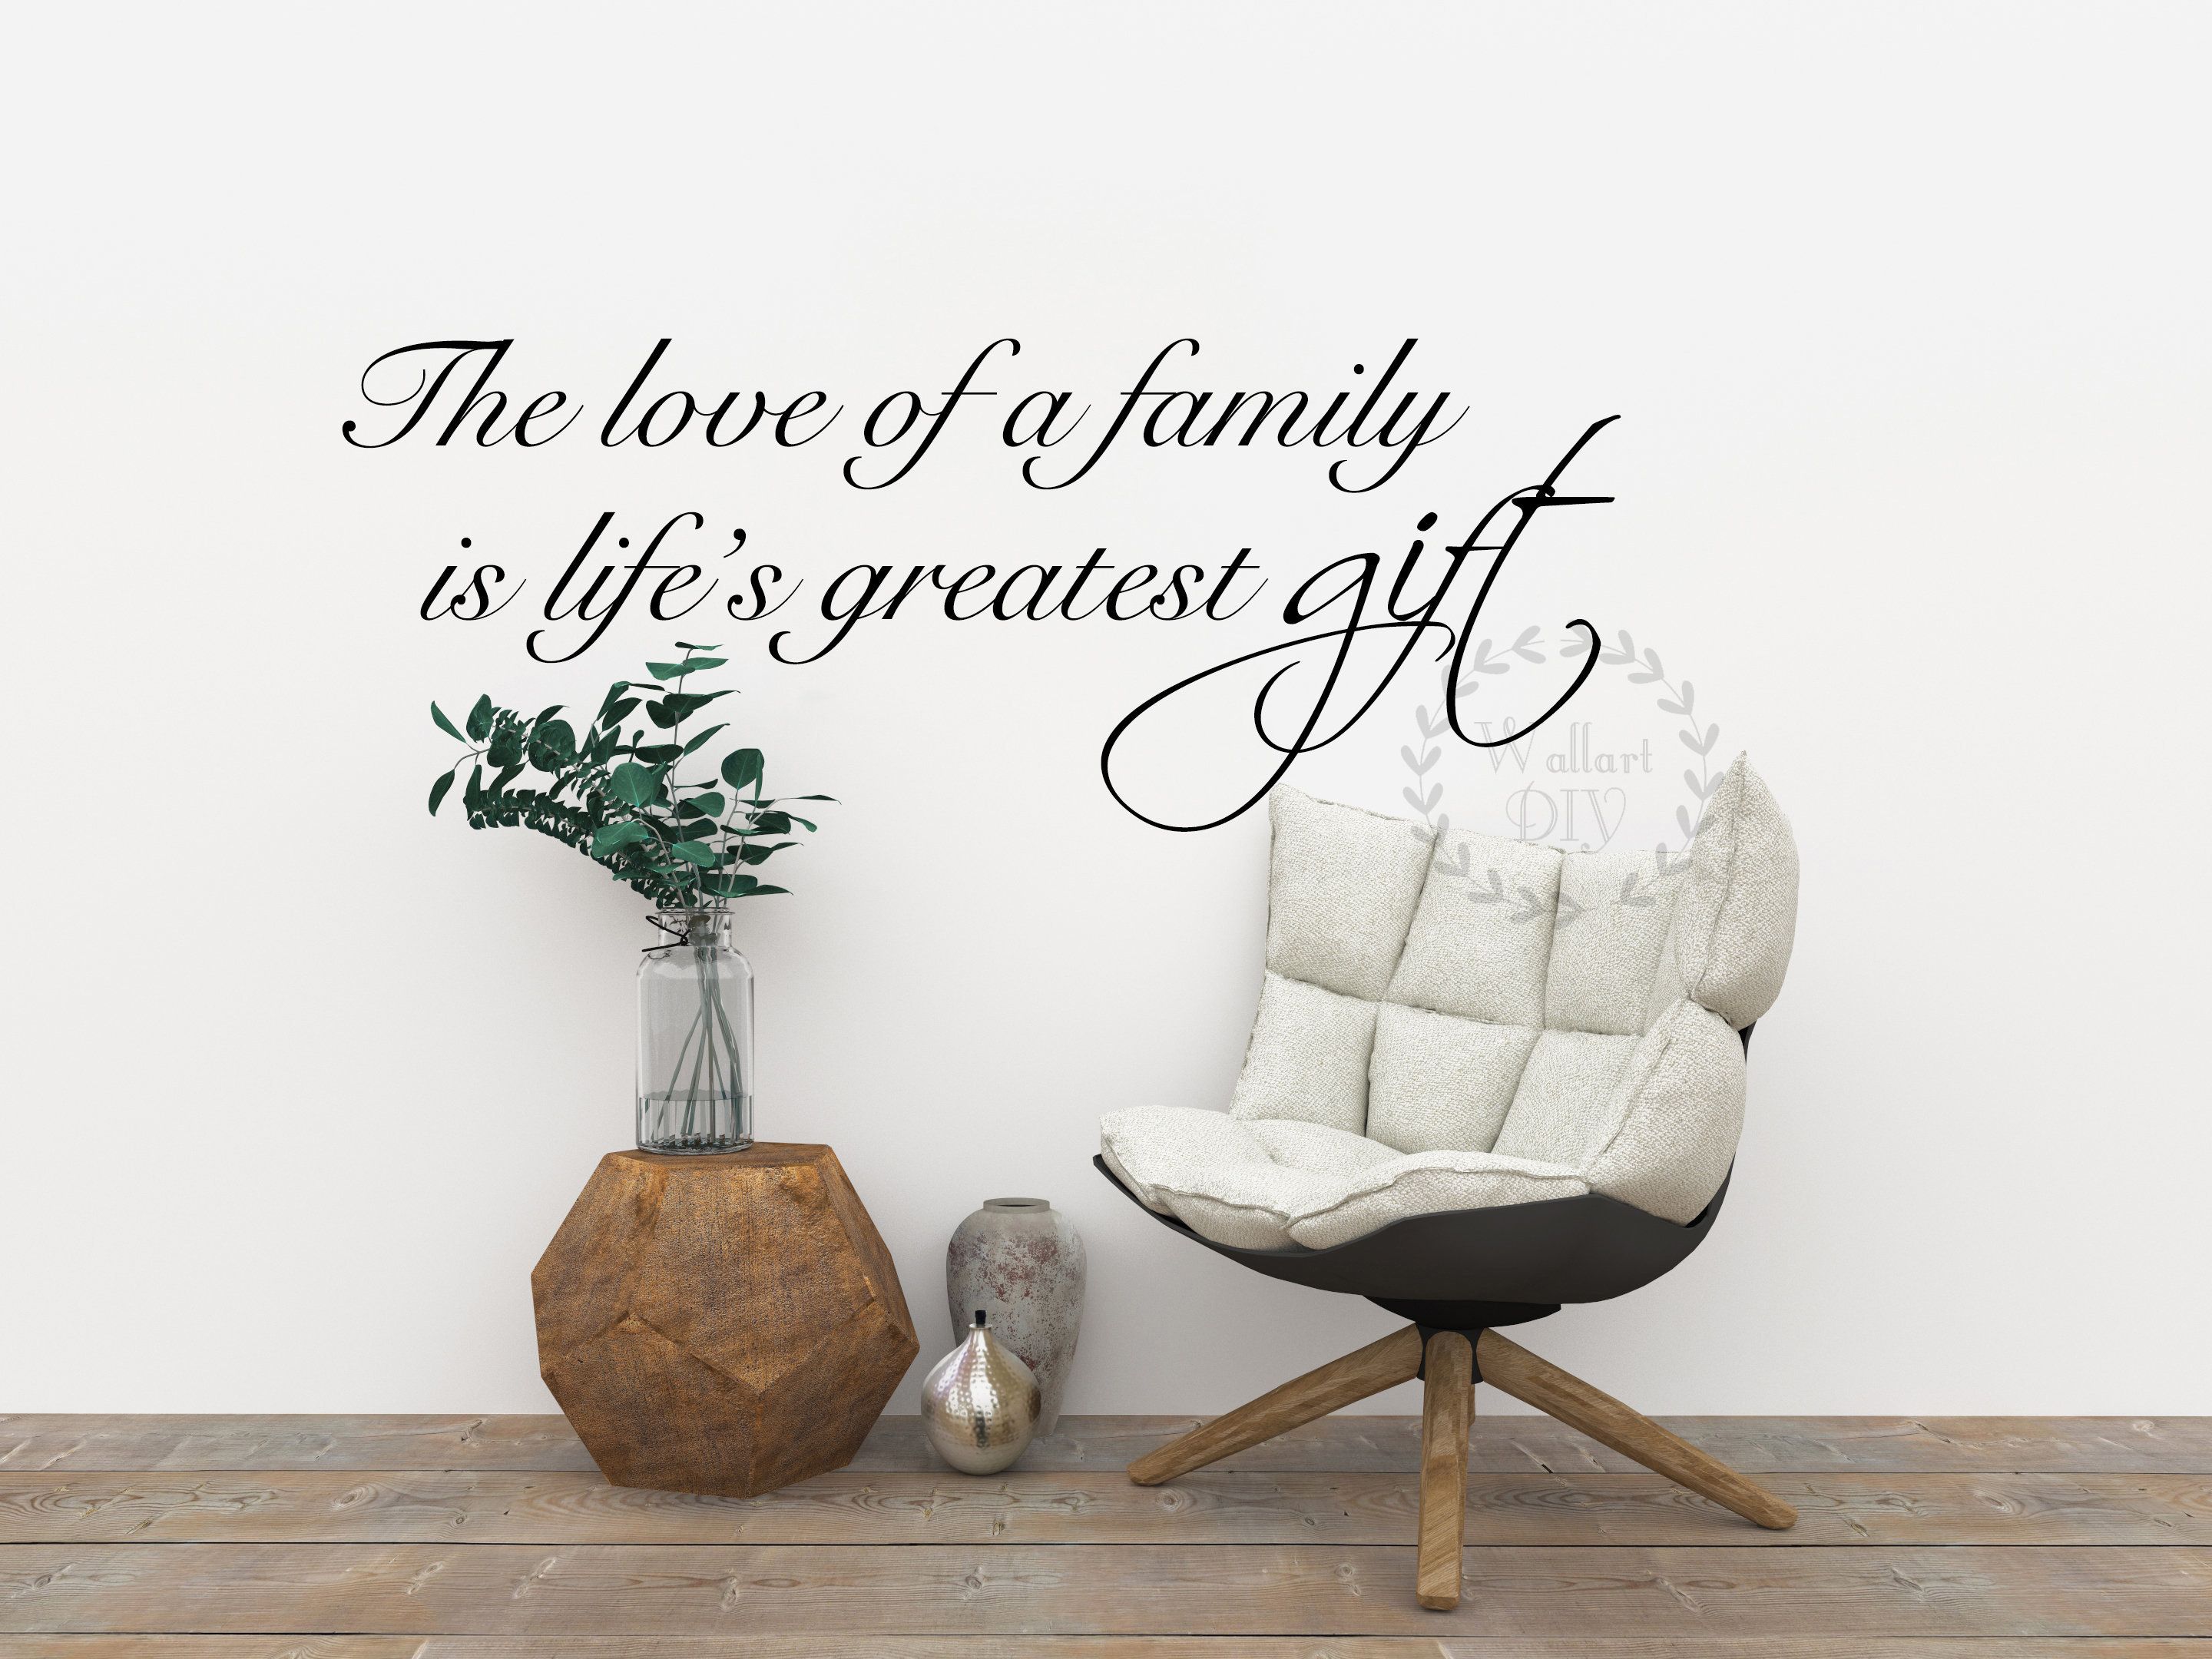 Quote Wall Decals Family Quote Wall Sticker Vinyl Lettering Family Quote  Wall Sticker Living Room Wall Decals Family Quote Wall Murals With Regard To Fawcett Thankful Heart Wall Decor (View 29 of 30)